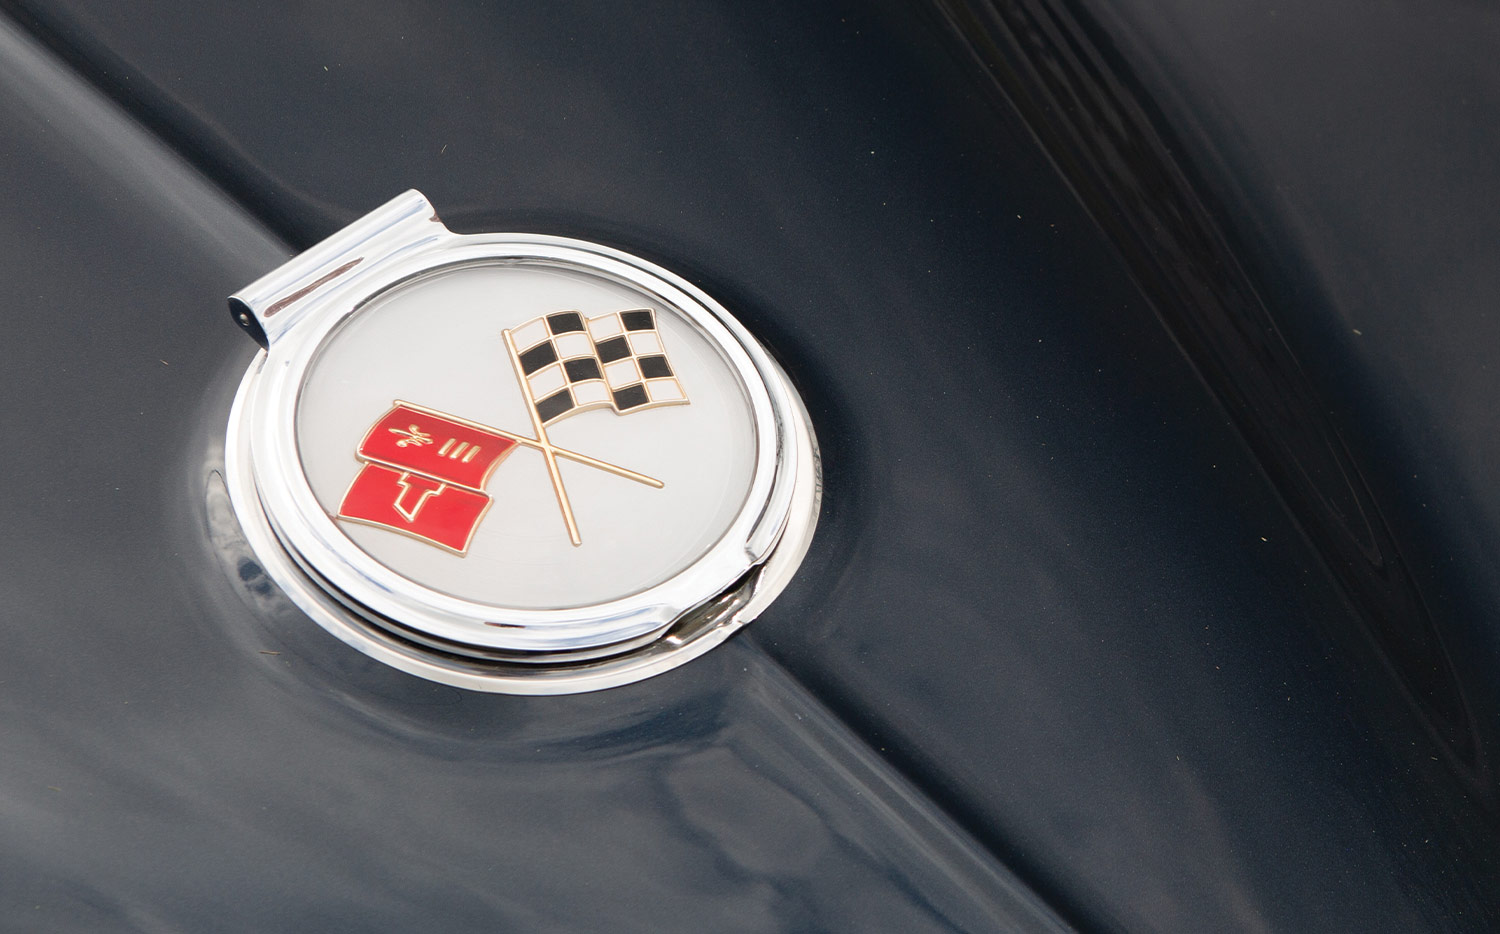 close view of the classic Corvette emblem on the '63 Sting Ray's gas tank cover